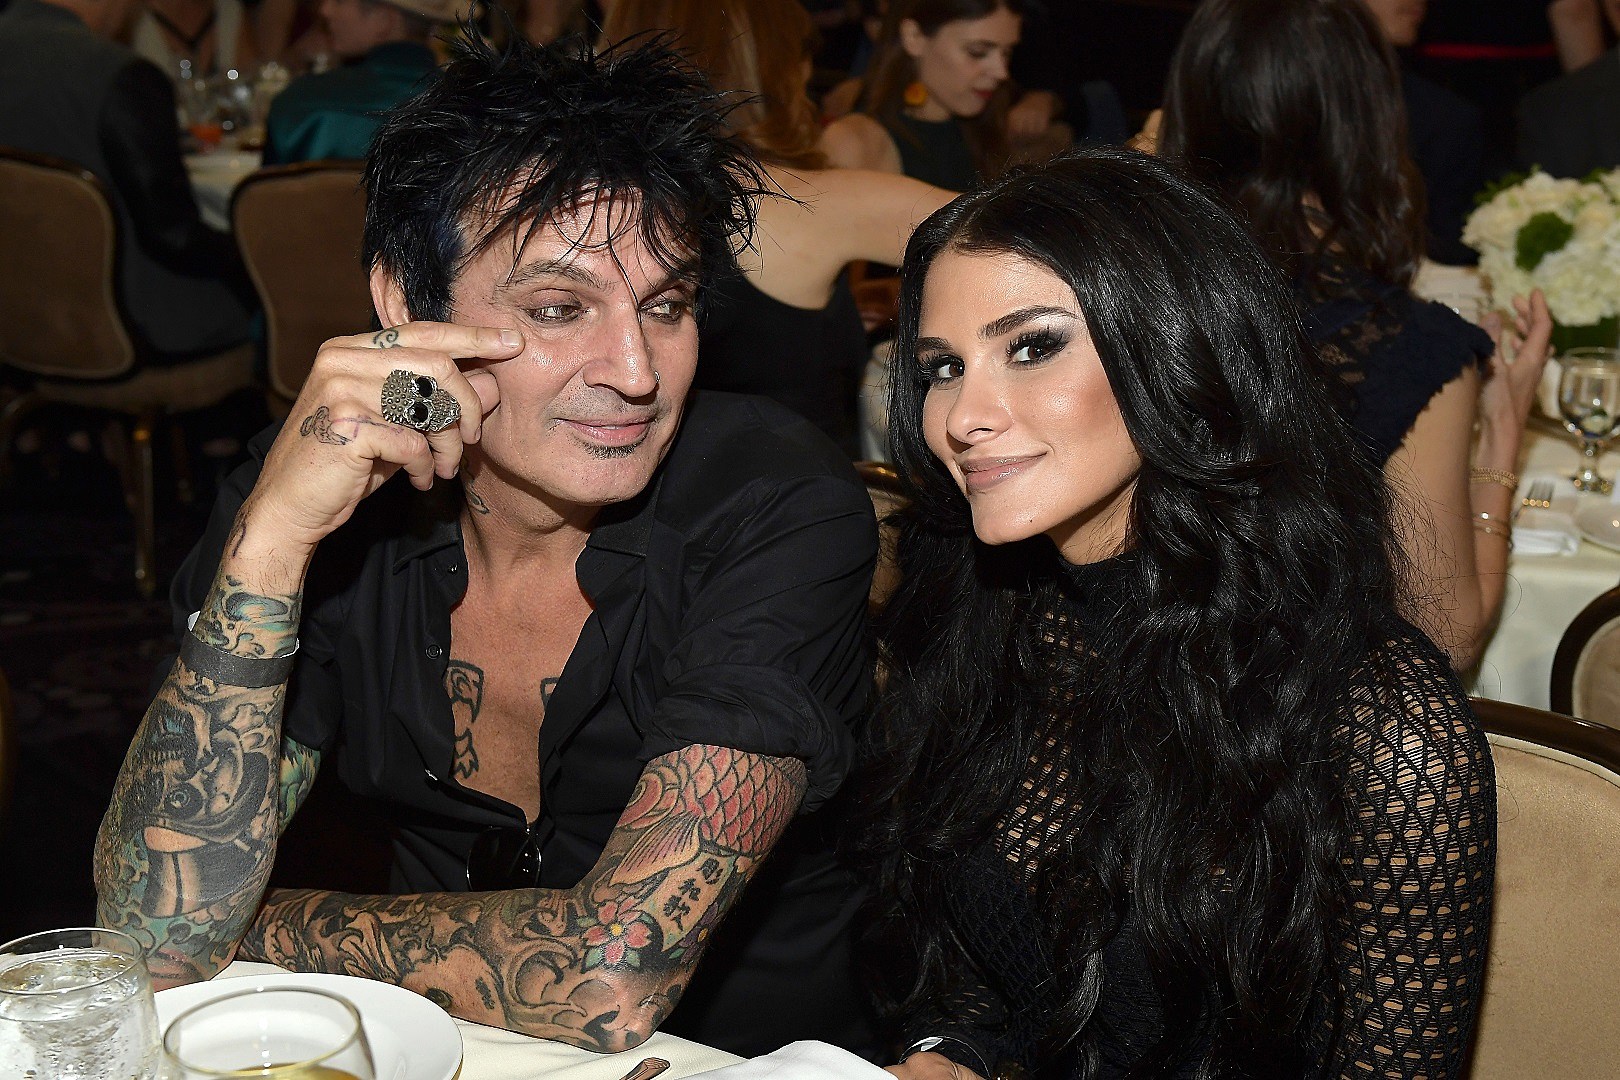 What happened to Tommy Lee?